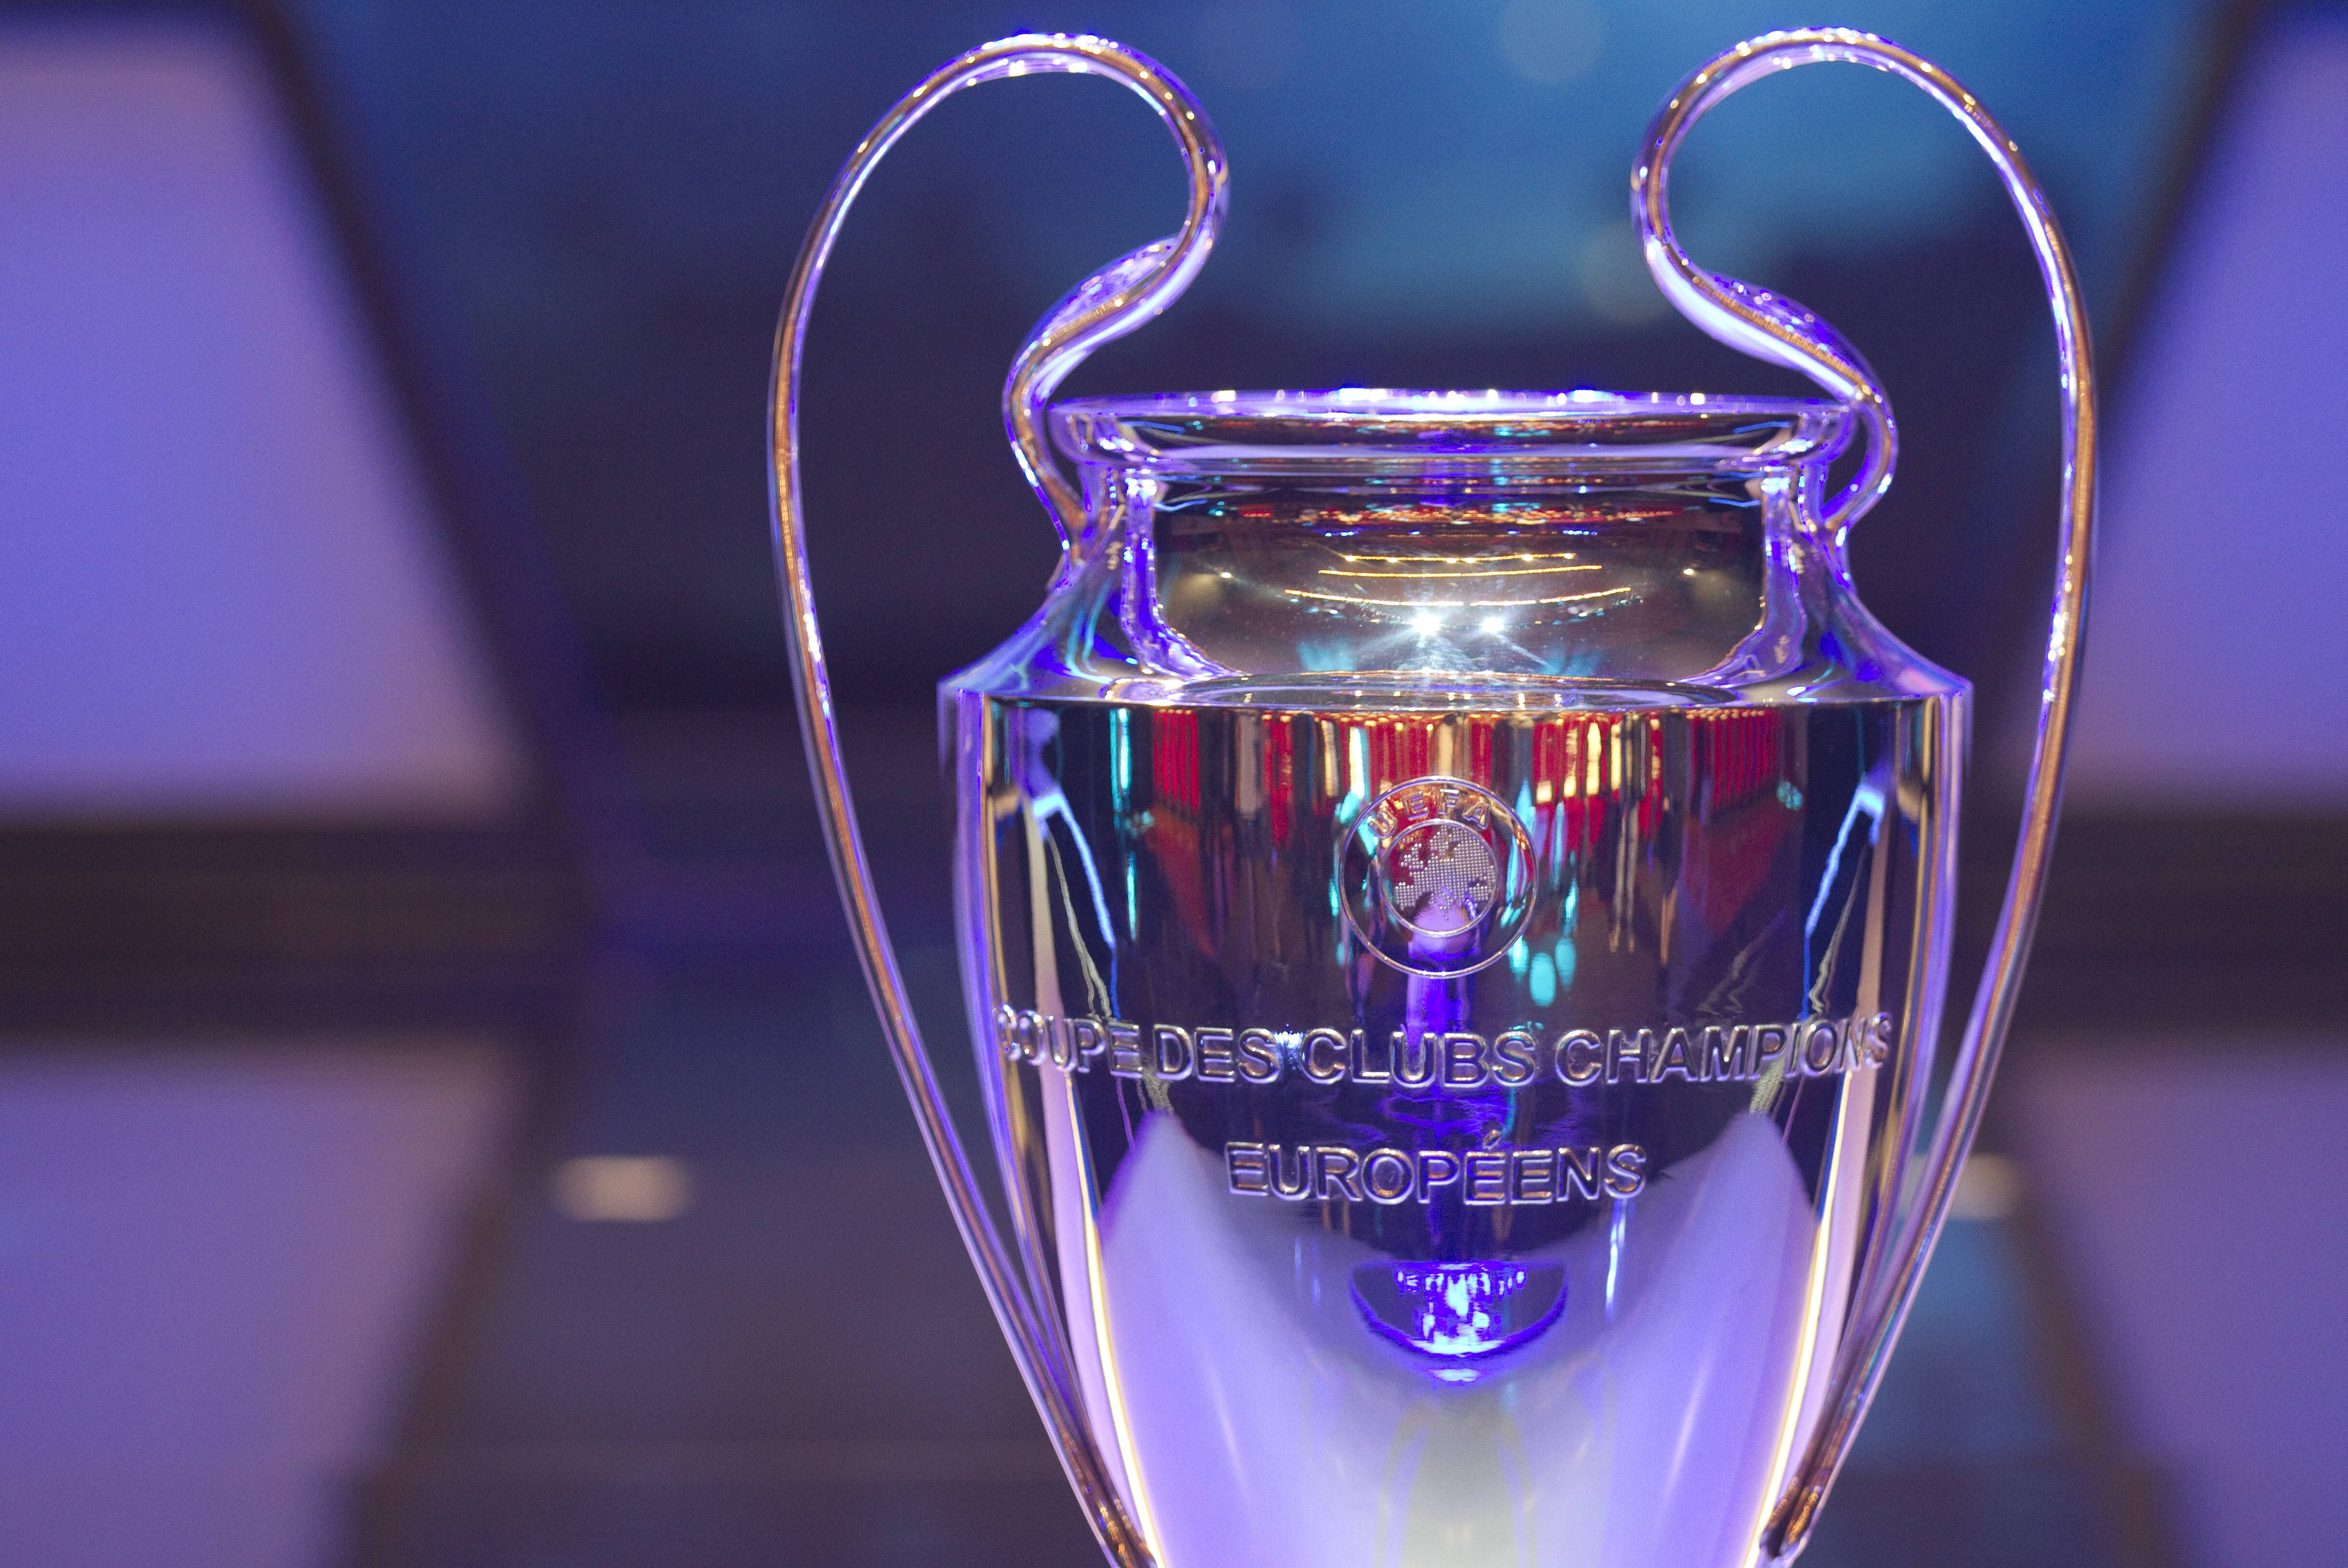 The UEFA Champions League trophy is pictured on display at the group stage draw ceremony in August 2019